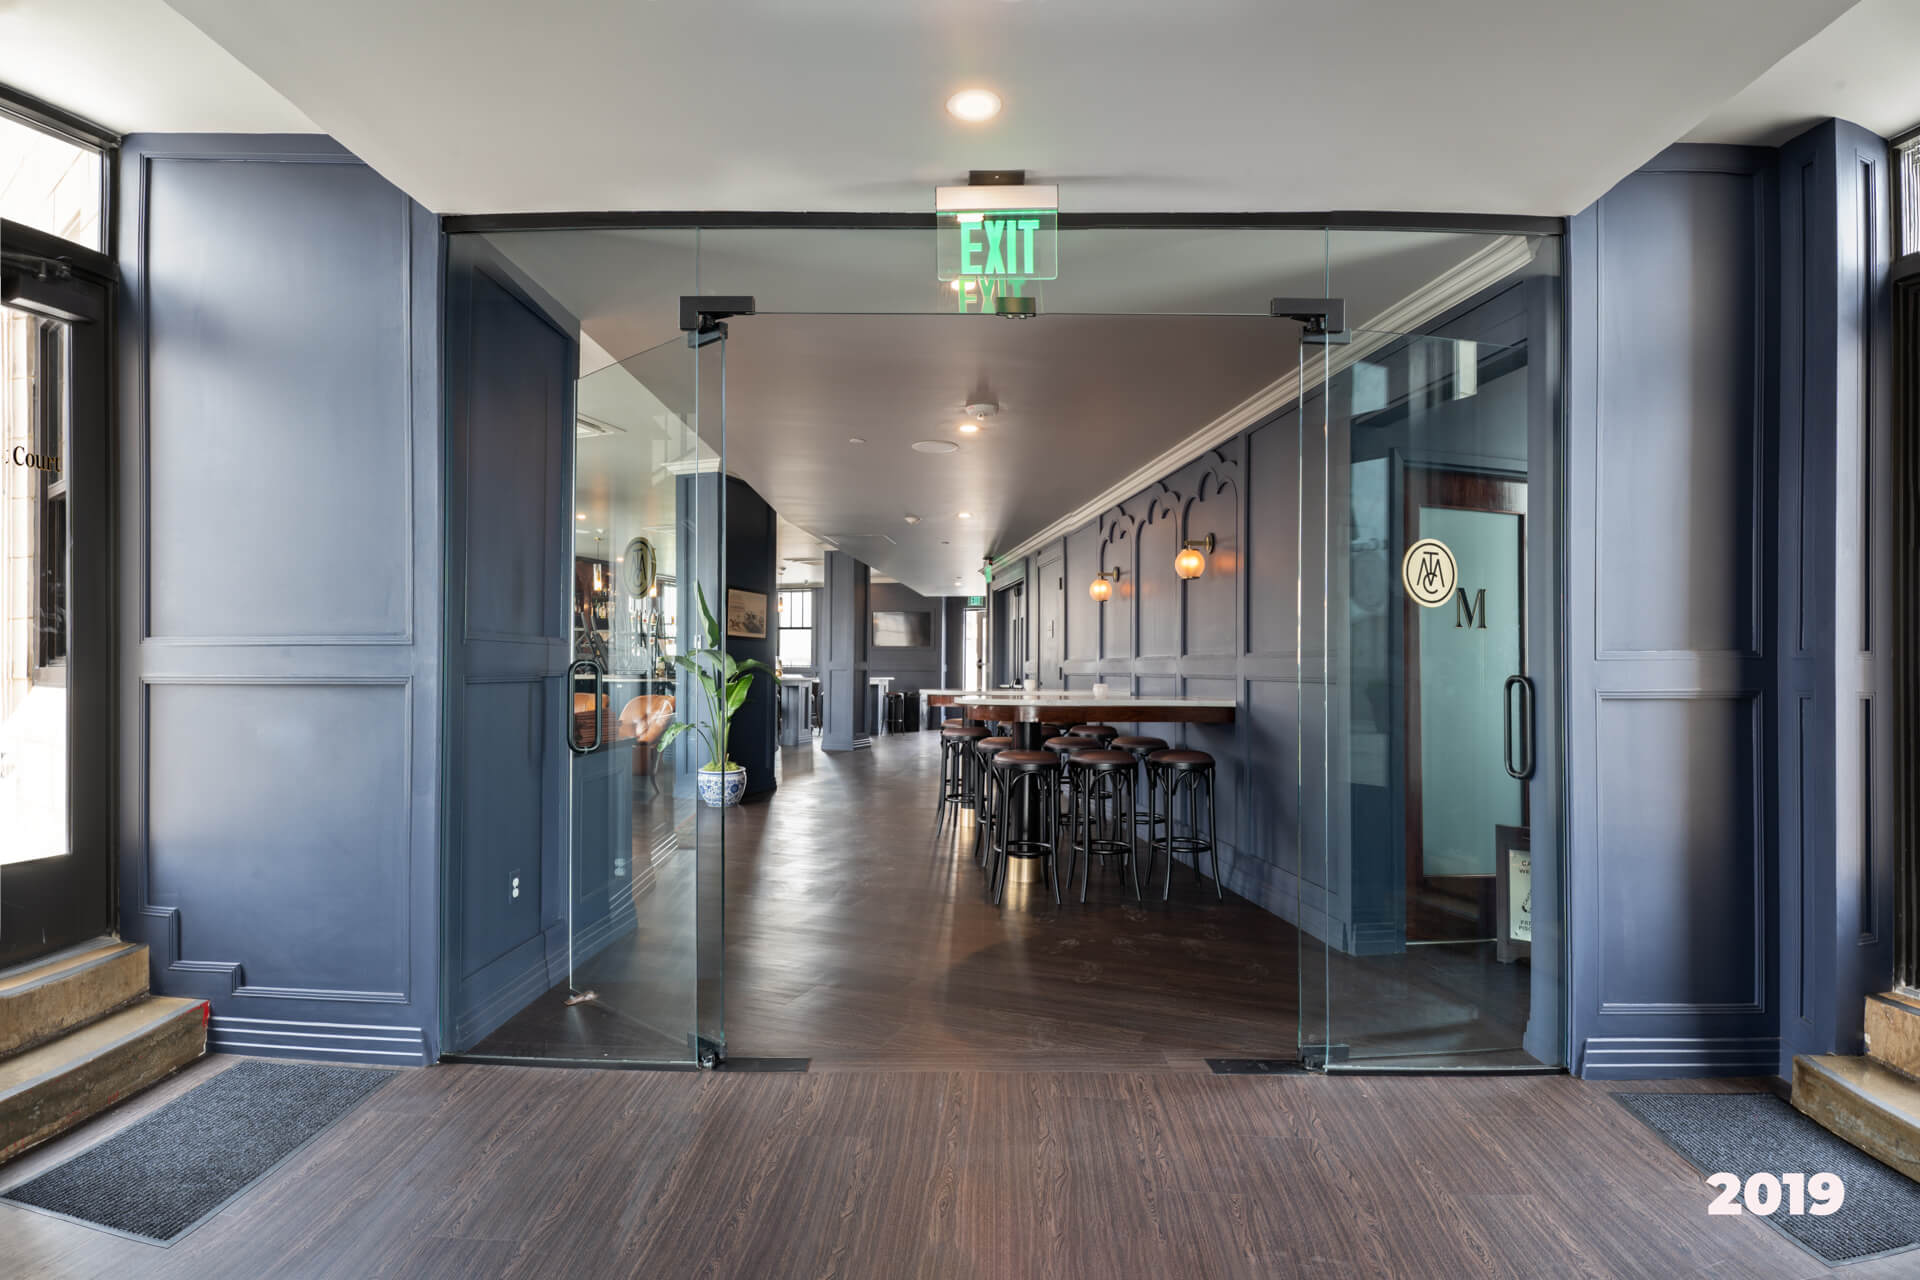 After construction, The Monarch Club has glass doors, navy walls, and new wood floors.